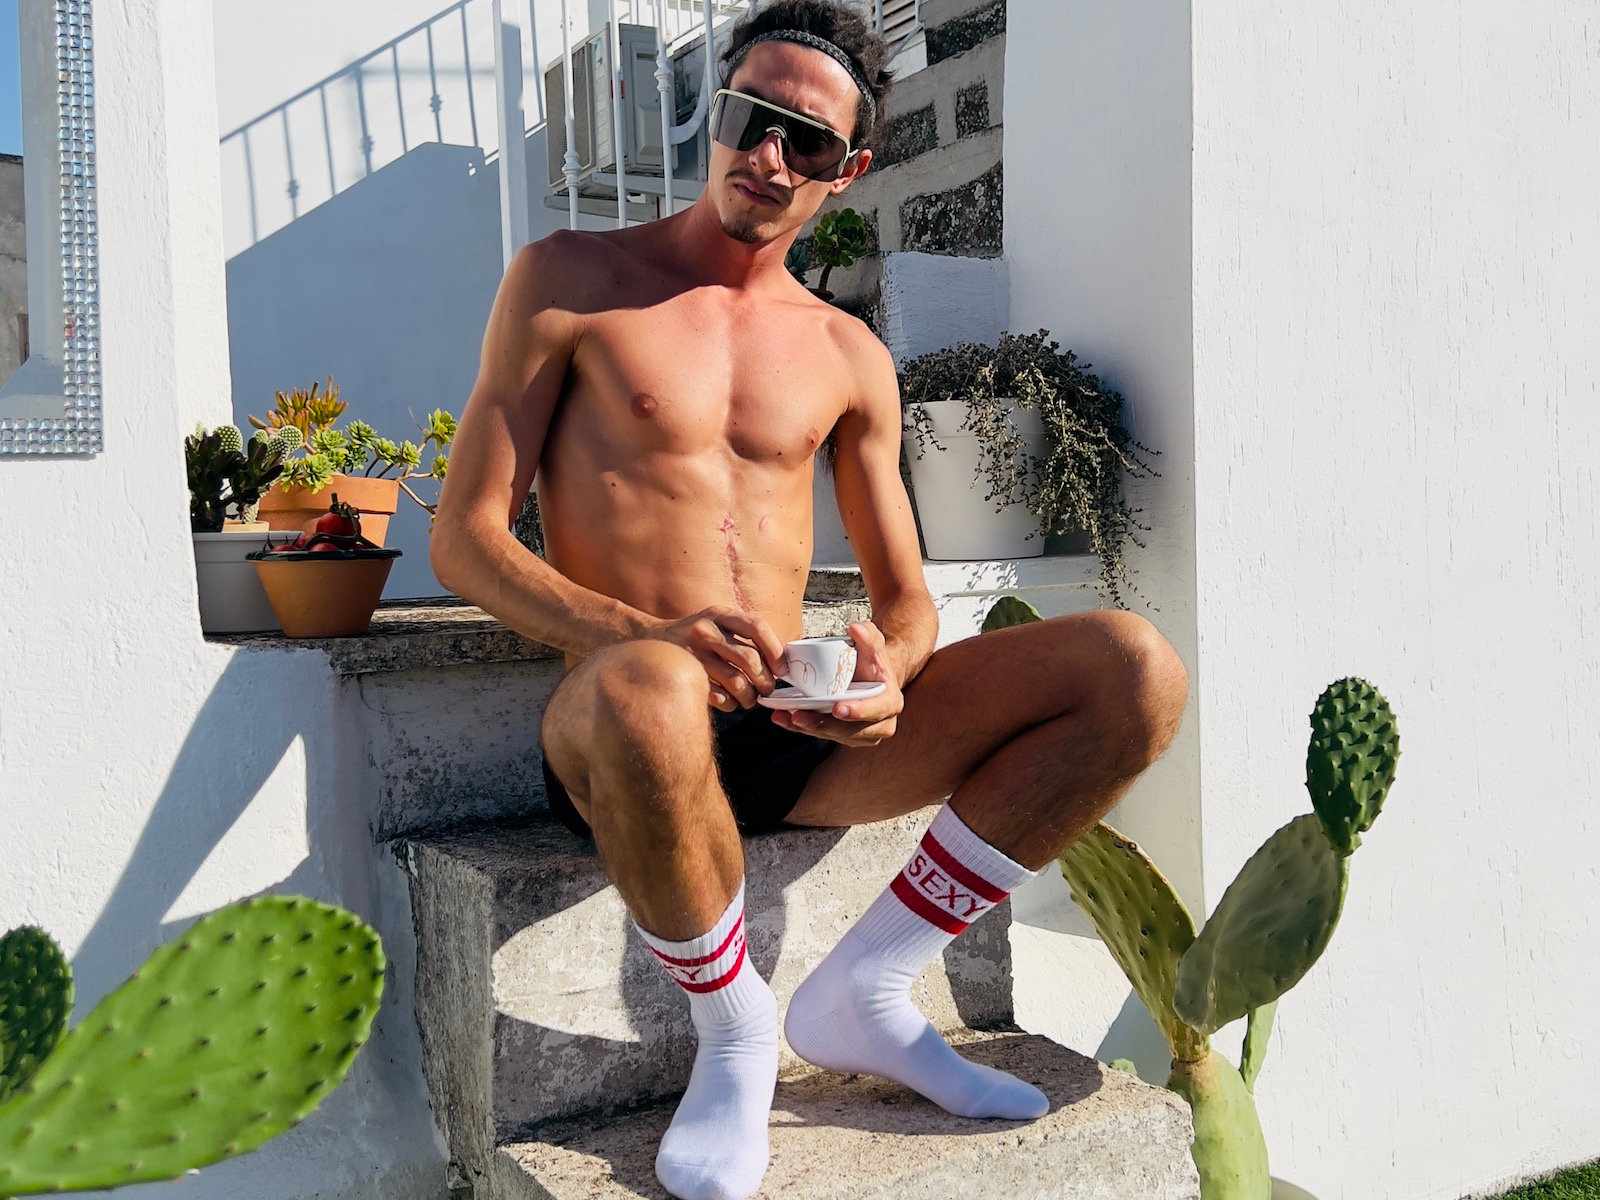 Gay hot guy in underwear and socks that say 